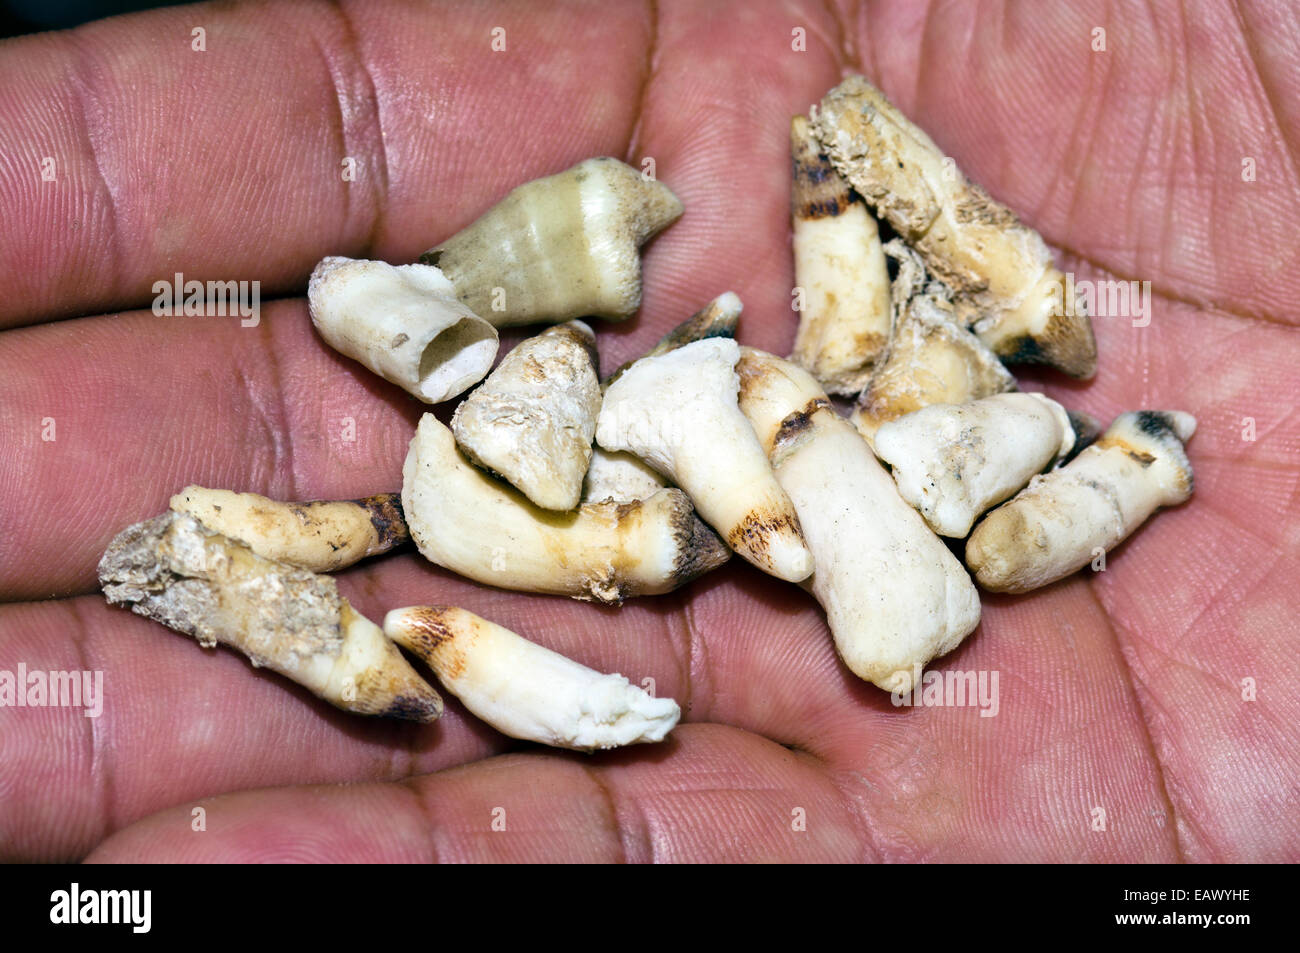 The teeth of a dead Caiman for sale as traditional medicine in an Amazon River town black market. Stock Photo